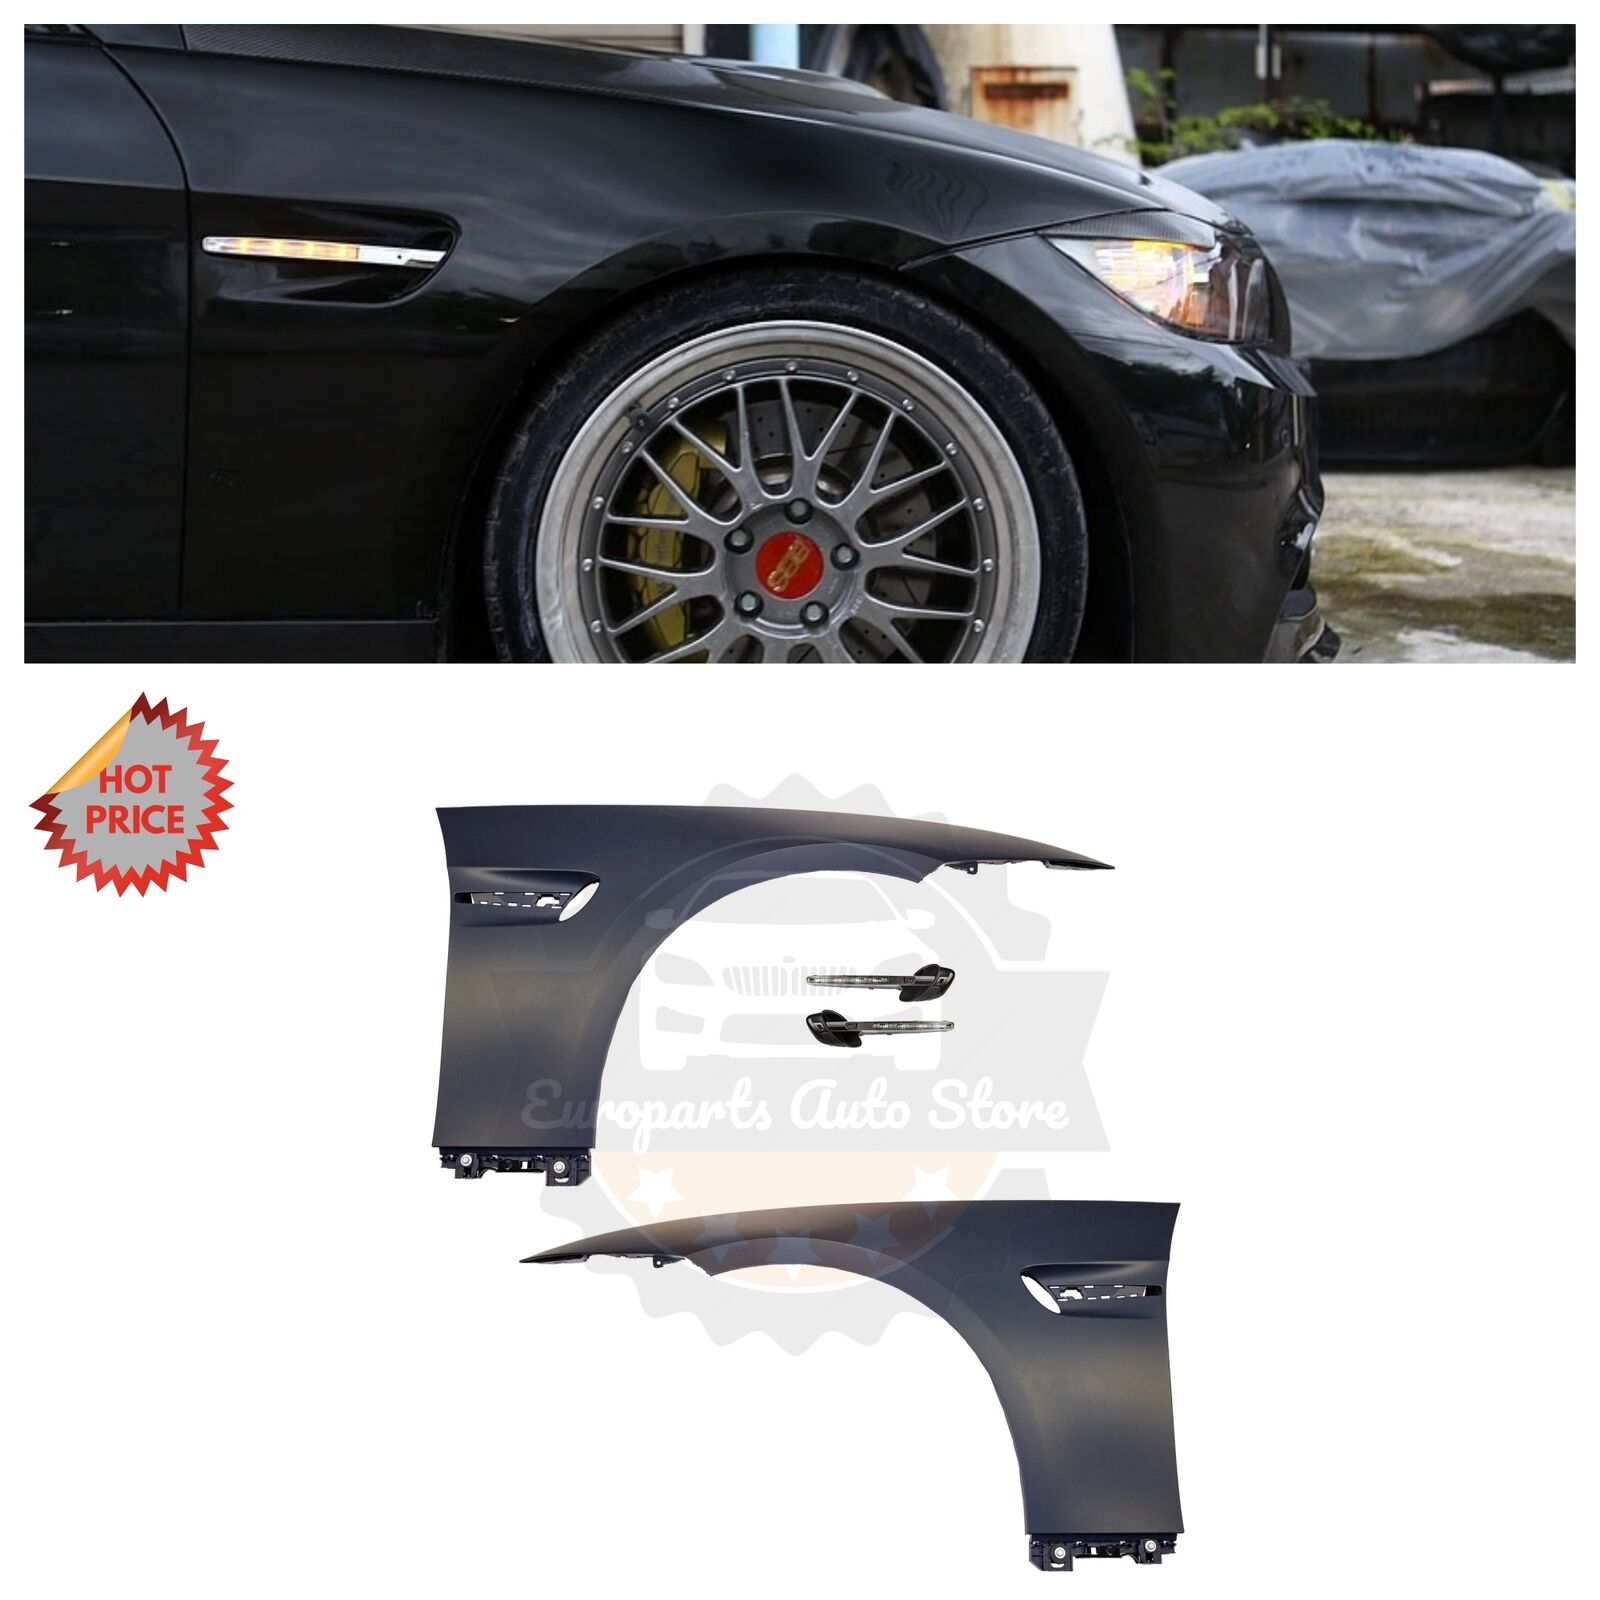 BMW E92 M3 STYLE OEM PLASTIC MATERIAL FENDERS W/ LED SIDE MARKERS FOR E92 E93 2D